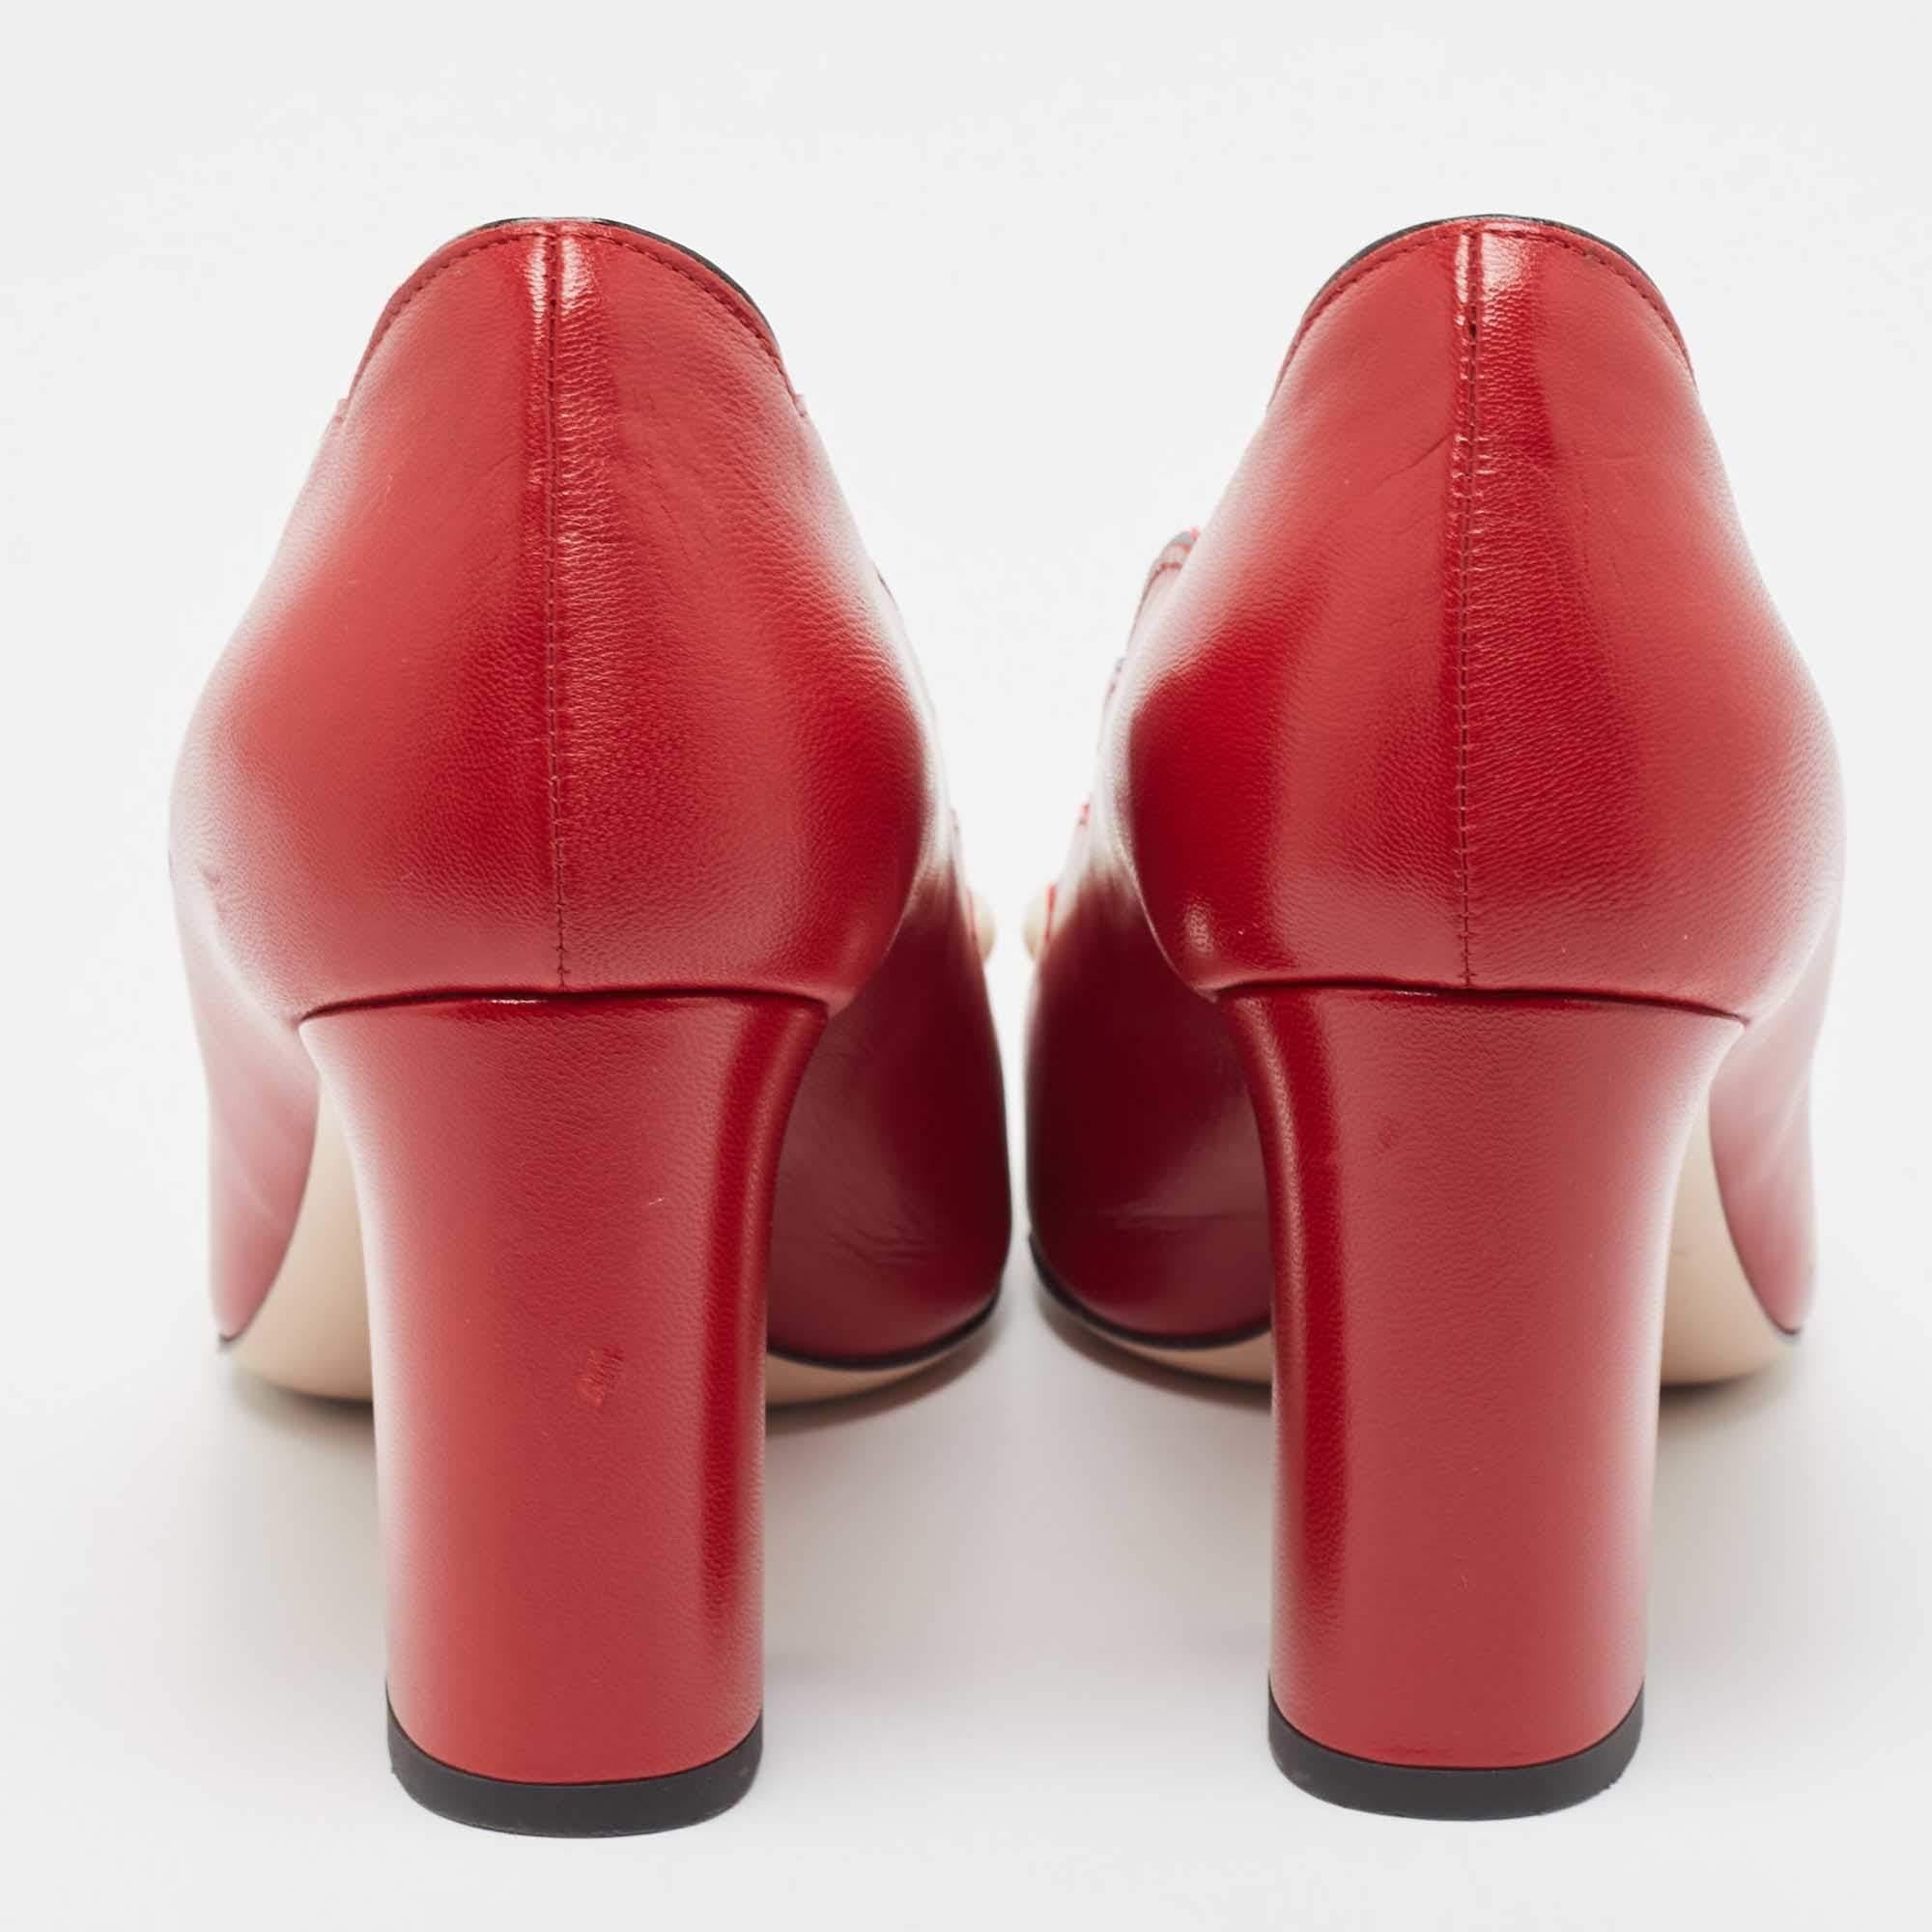 Gucci Red Leather Willow Faux Pearl Block Heel Pumps Size 38 1